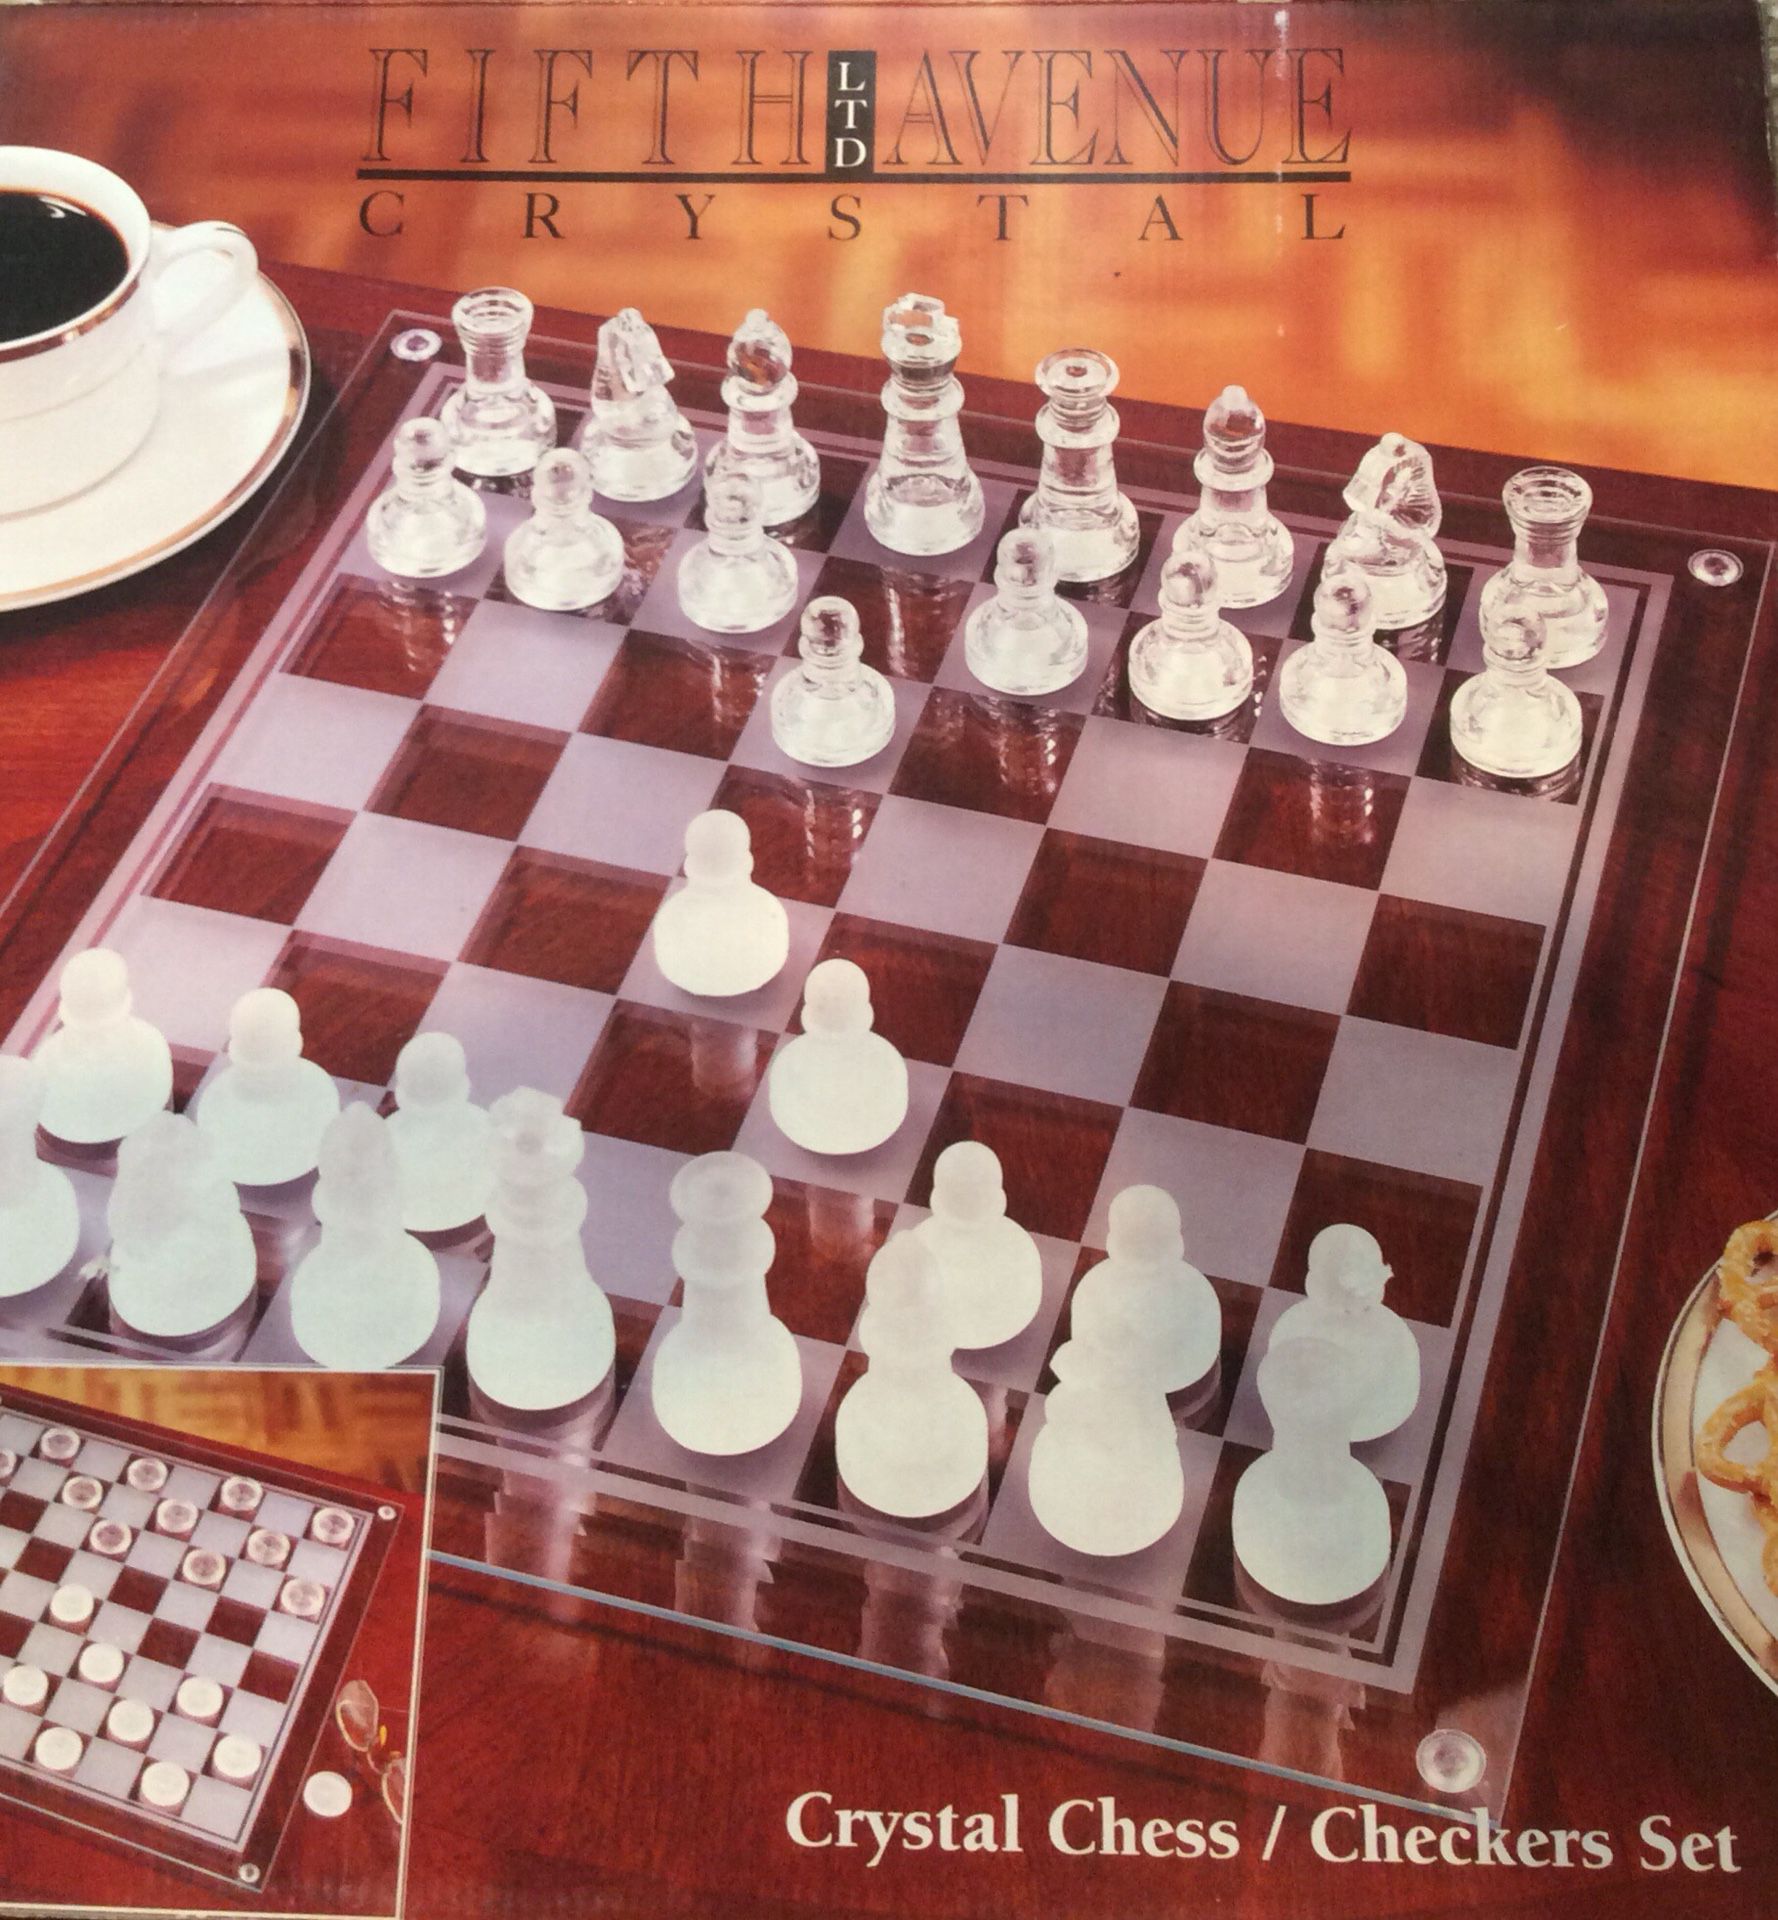 Crystal 57 pc. Chess/Checkers Set